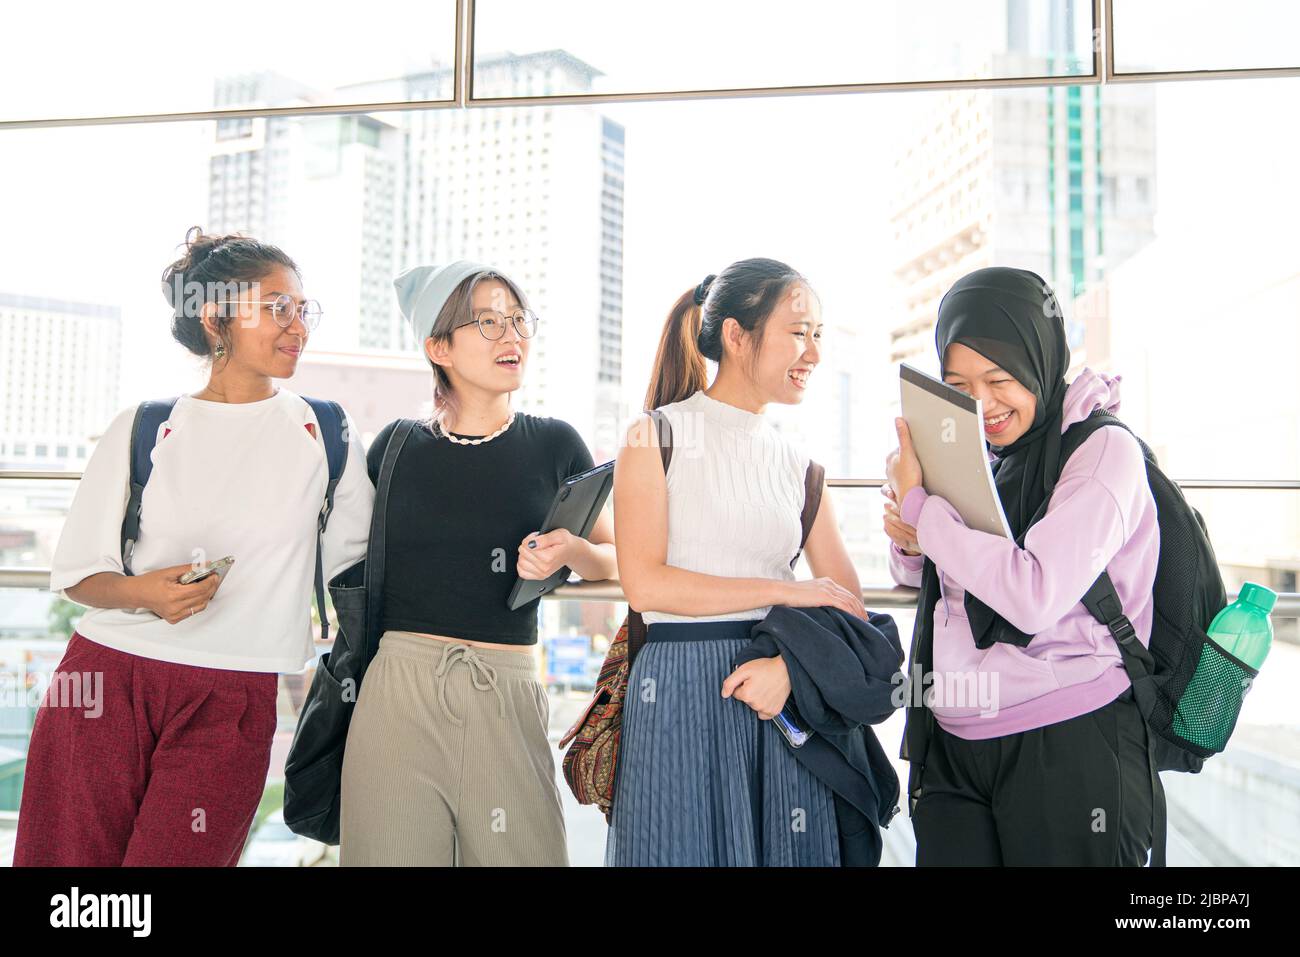 Four multi-racial young women students laughing. Celebrating friendship concept. Stock Photo